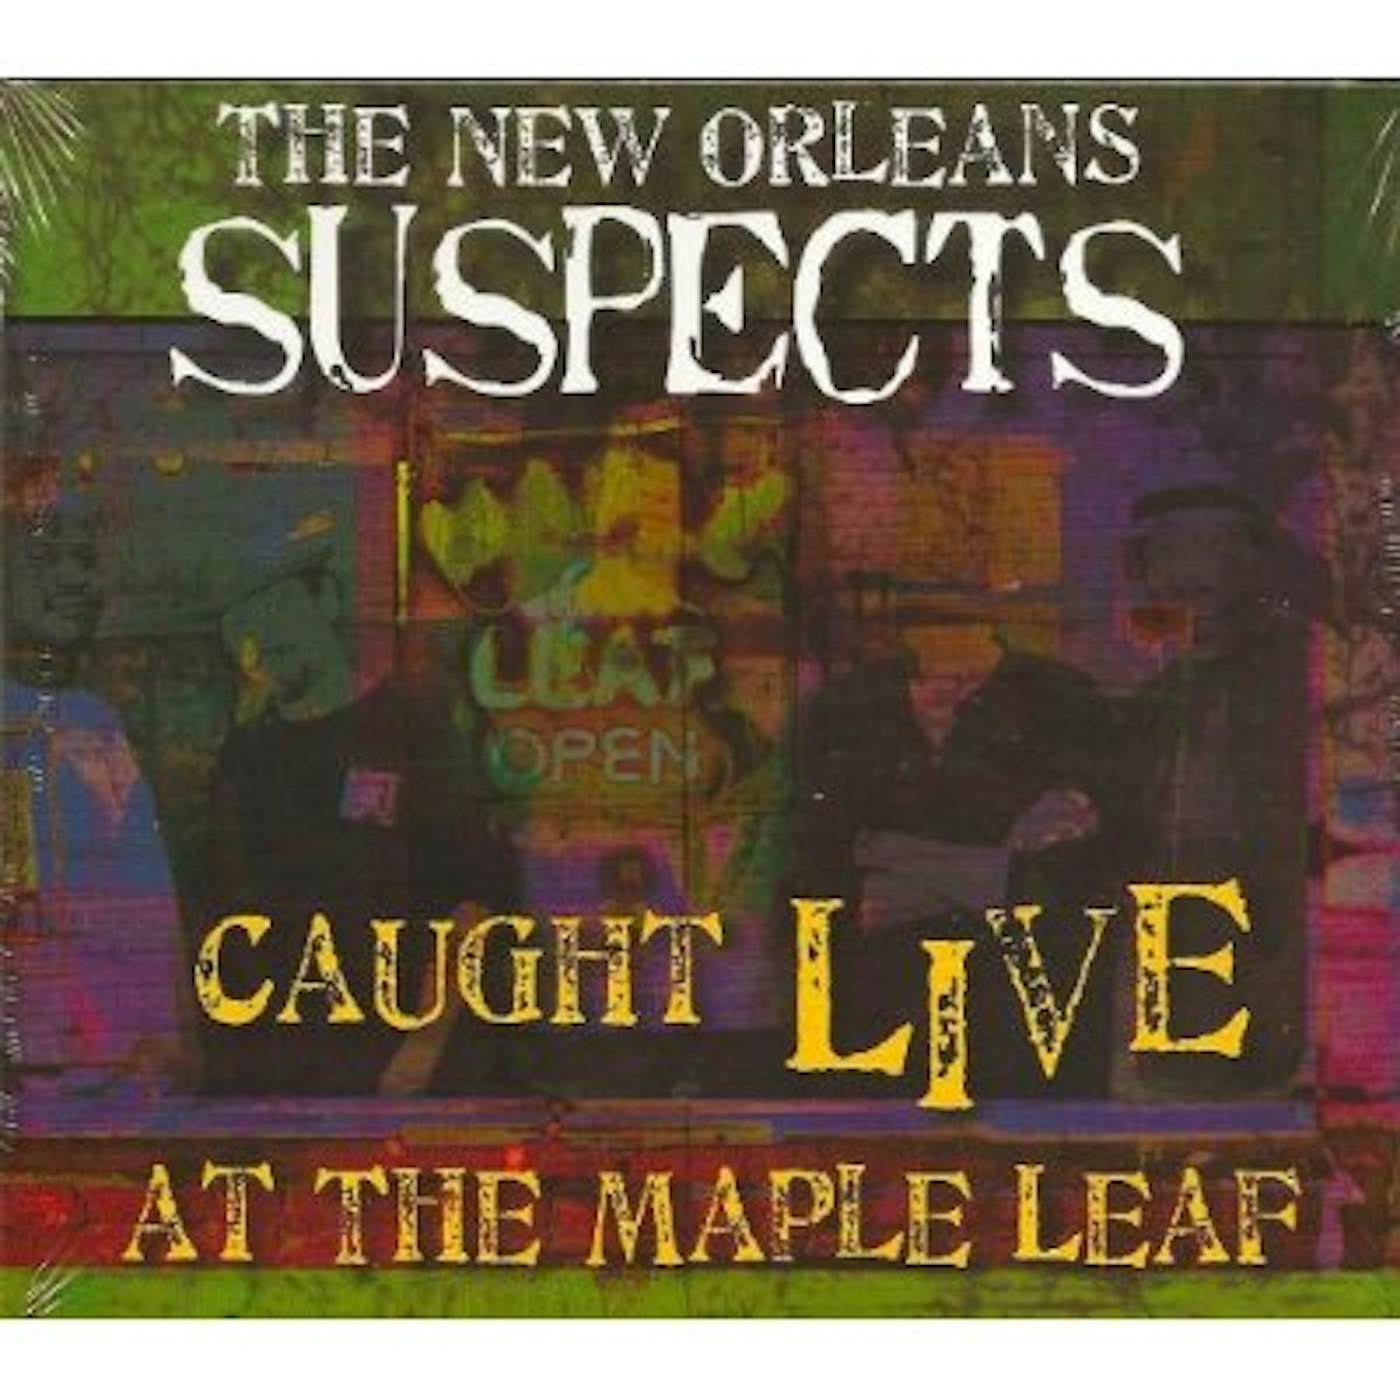 The New Orleans Suspects CAUGHT LIVE AT MAPLE LEAF CD